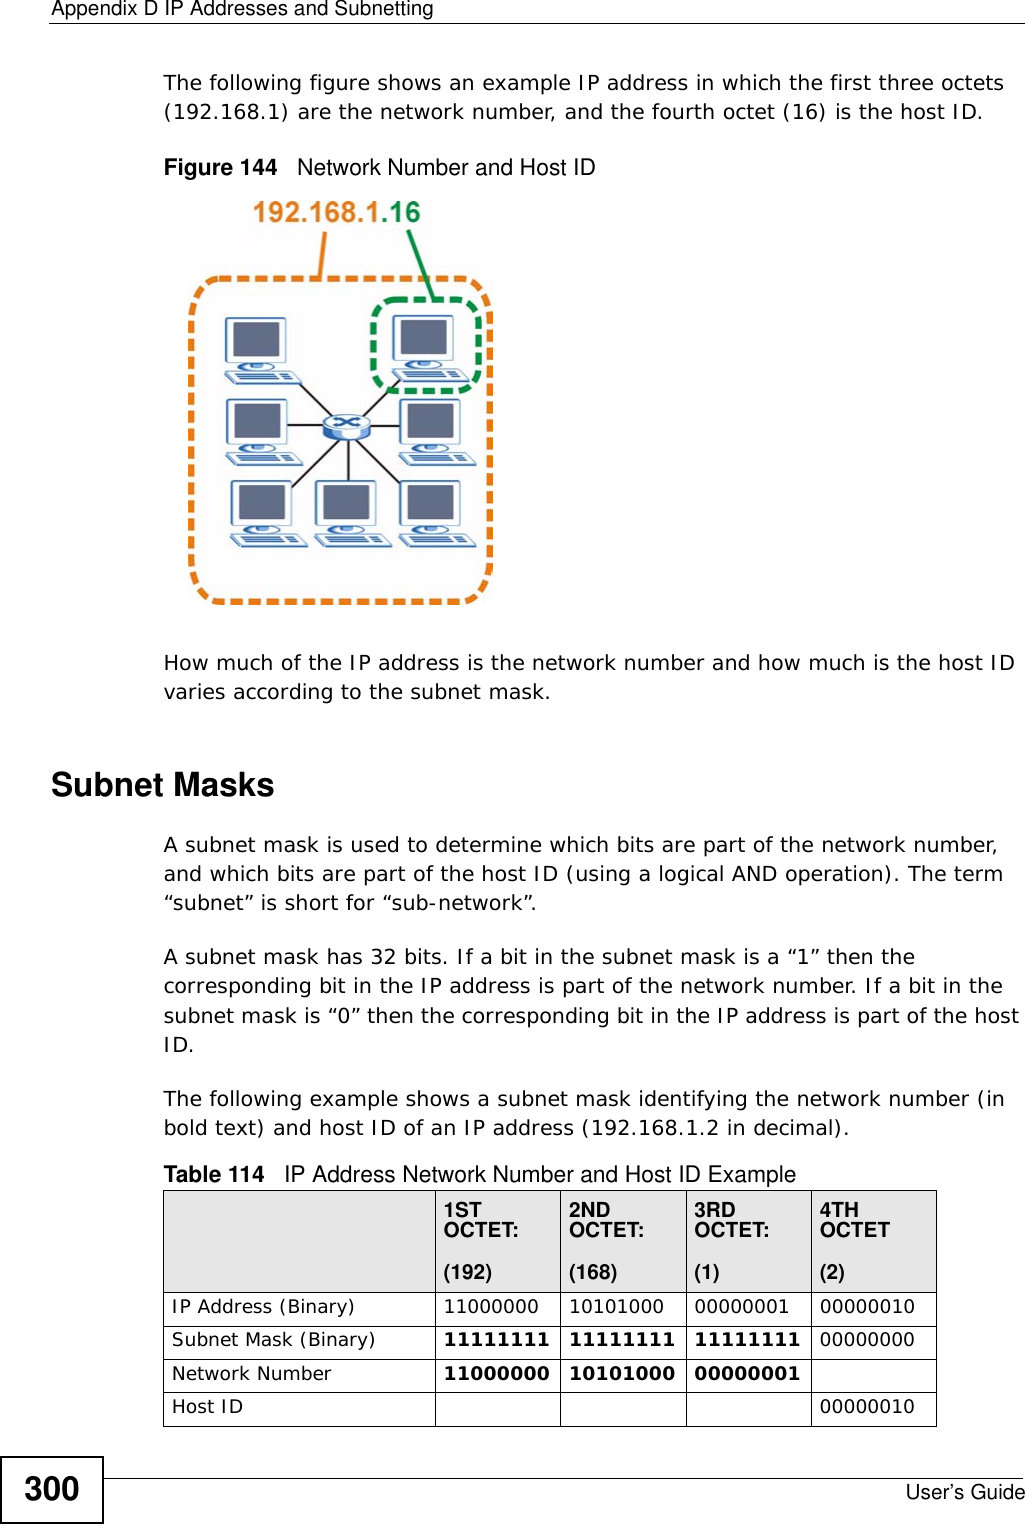 Appendix D IP Addresses and SubnettingUser’s Guide300The following figure shows an example IP address in which the first three octets (192.168.1) are the network number, and the fourth octet (16) is the host ID.Figure 144   Network Number and Host IDHow much of the IP address is the network number and how much is the host ID varies according to the subnet mask.  Subnet MasksA subnet mask is used to determine which bits are part of the network number, and which bits are part of the host ID (using a logical AND operation). The term “subnet” is short for “sub-network”.A subnet mask has 32 bits. If a bit in the subnet mask is a “1” then the corresponding bit in the IP address is part of the network number. If a bit in the subnet mask is “0” then the corresponding bit in the IP address is part of the host ID. The following example shows a subnet mask identifying the network number (in bold text) and host ID of an IP address (192.168.1.2 in decimal).Table 114   IP Address Network Number and Host ID Example1ST OCTET:(192)2ND OCTET:(168)3RD OCTET:(1)4TH OCTET(2)IP Address (Binary) 11000000 10101000 00000001 00000010Subnet Mask (Binary) 11111111 11111111 11111111 00000000Network Number 11000000 10101000 00000001Host ID 00000010